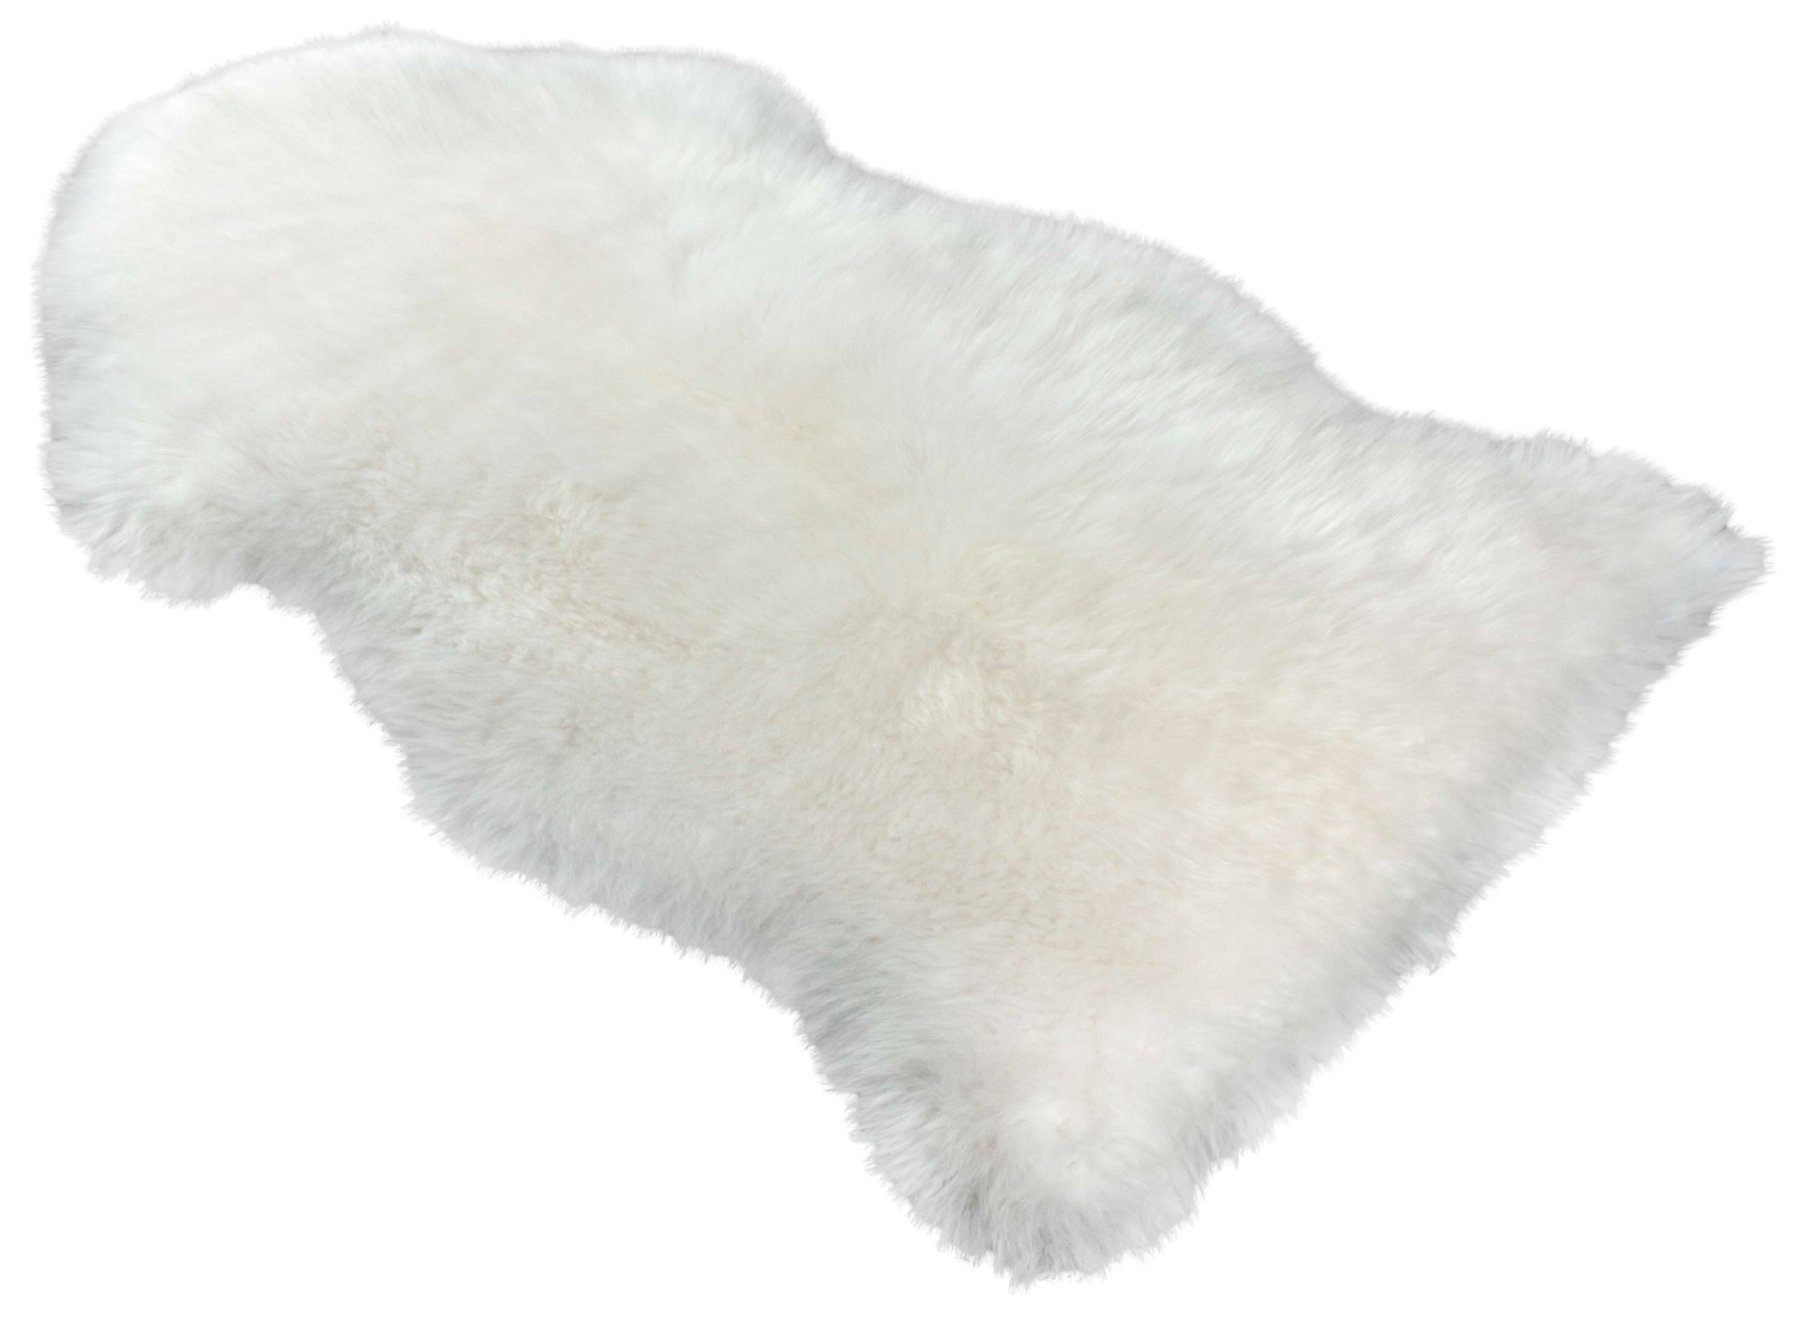 Lambskin rug Blake white 80-90cm made of 100% natural lambskin, wool height 50mm, ideal in living room & bedroom